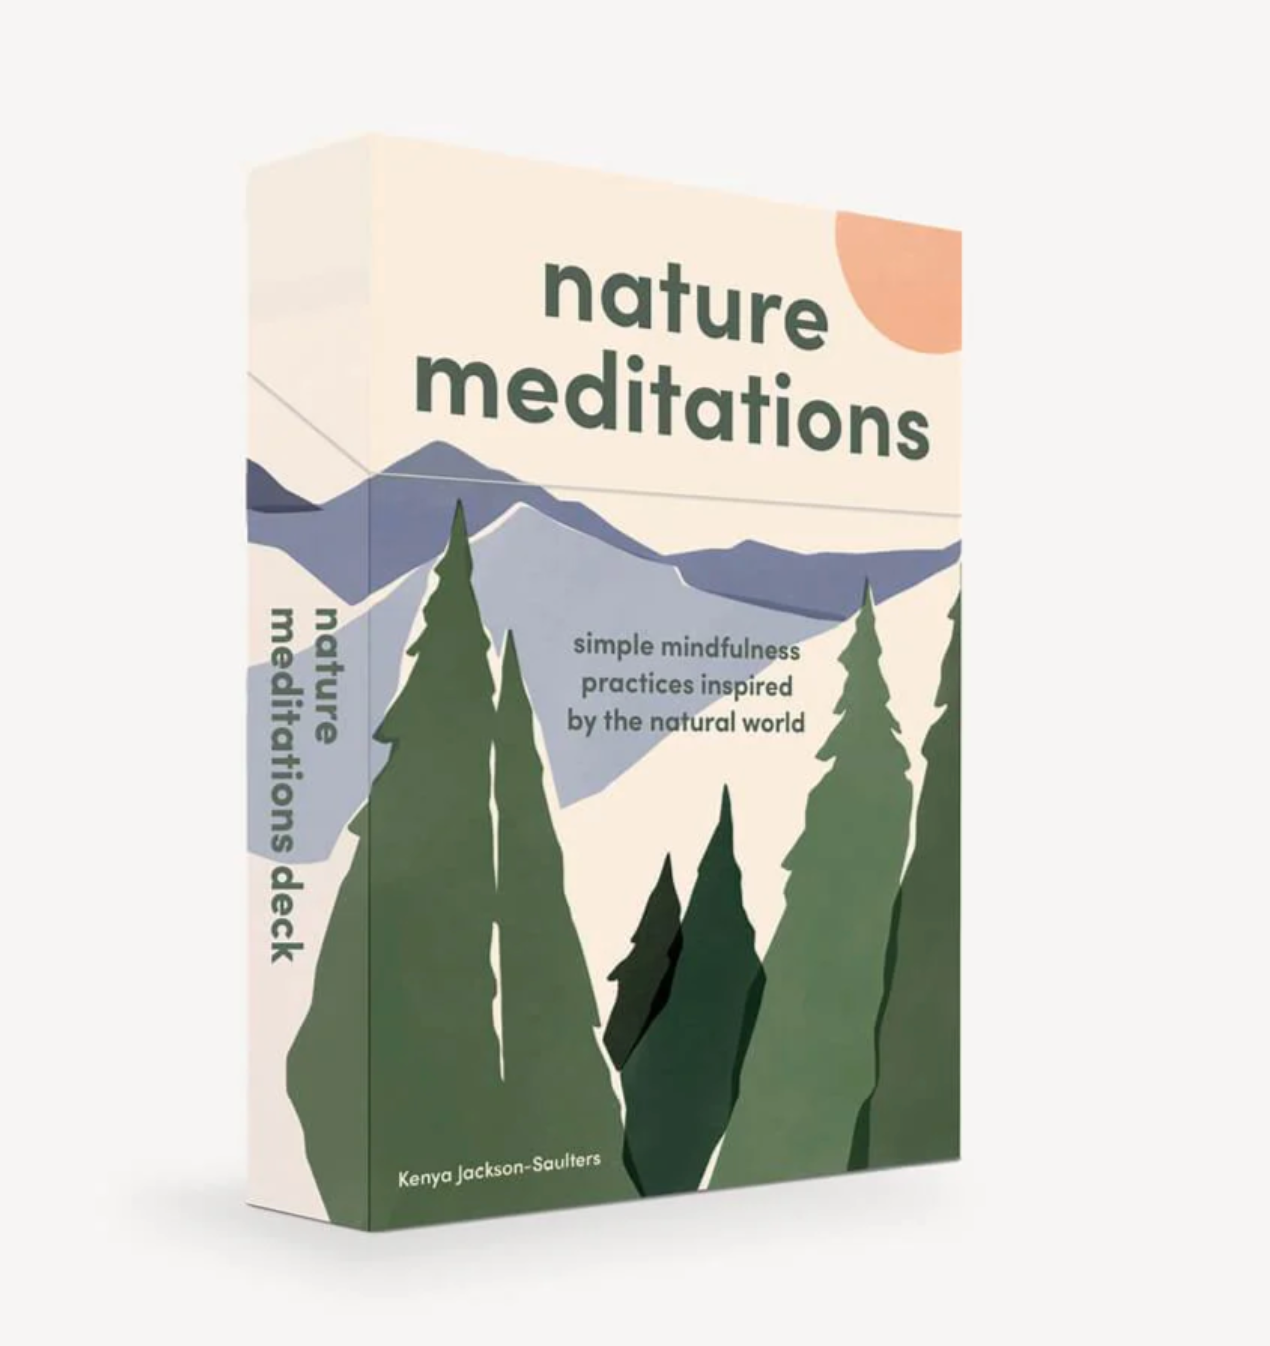 Nature Meditations Deck Simple Mindfulness Practices Inspired by the Natural World -61 cards